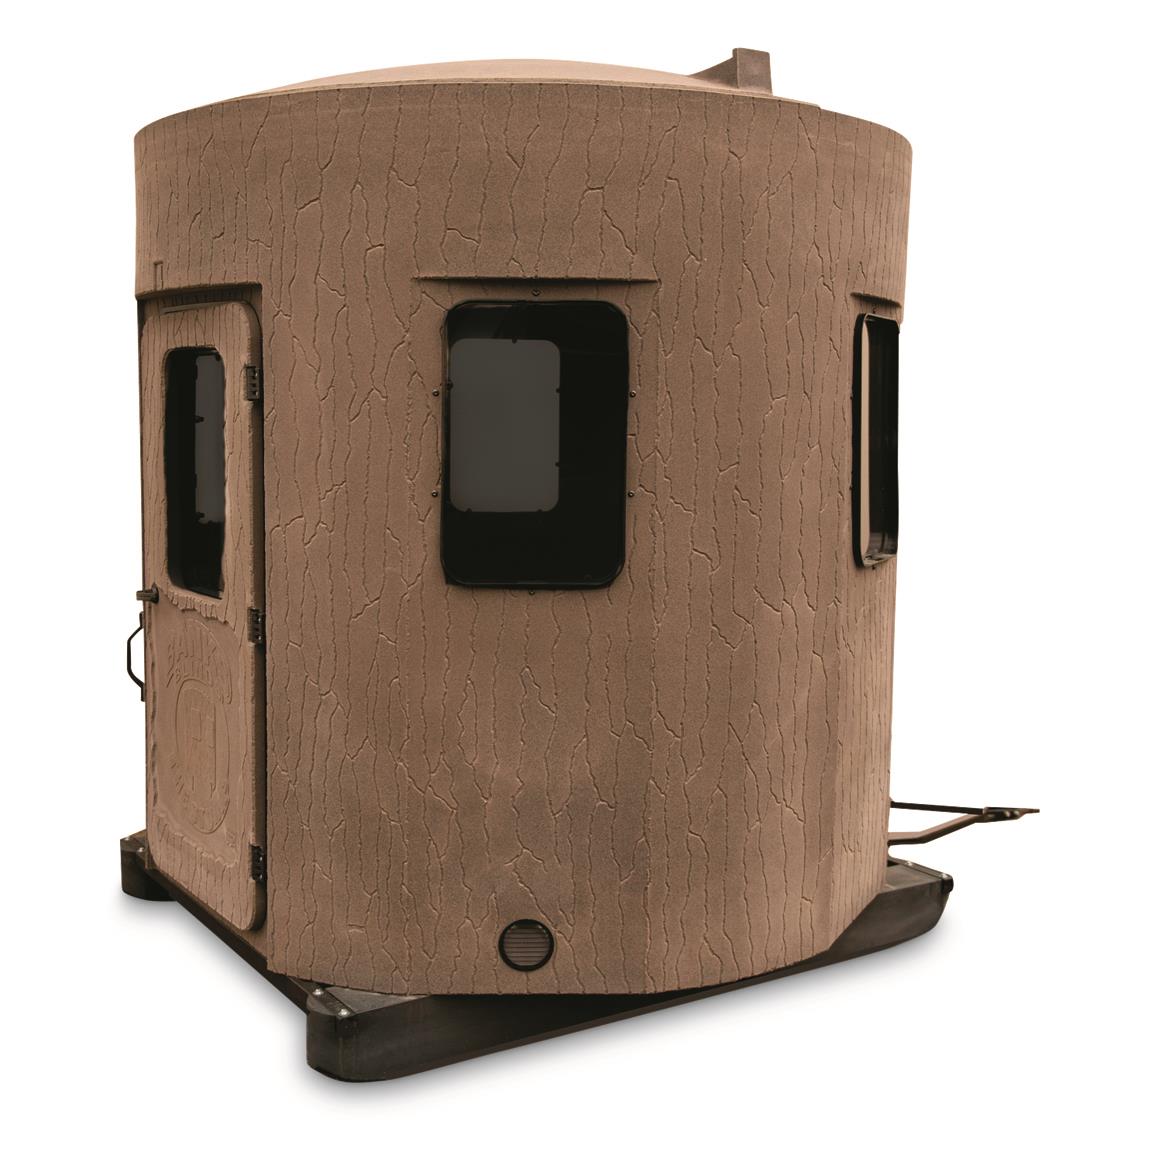 Banks Outdoors The Stump 4 Scout Phantom Hunting Blind